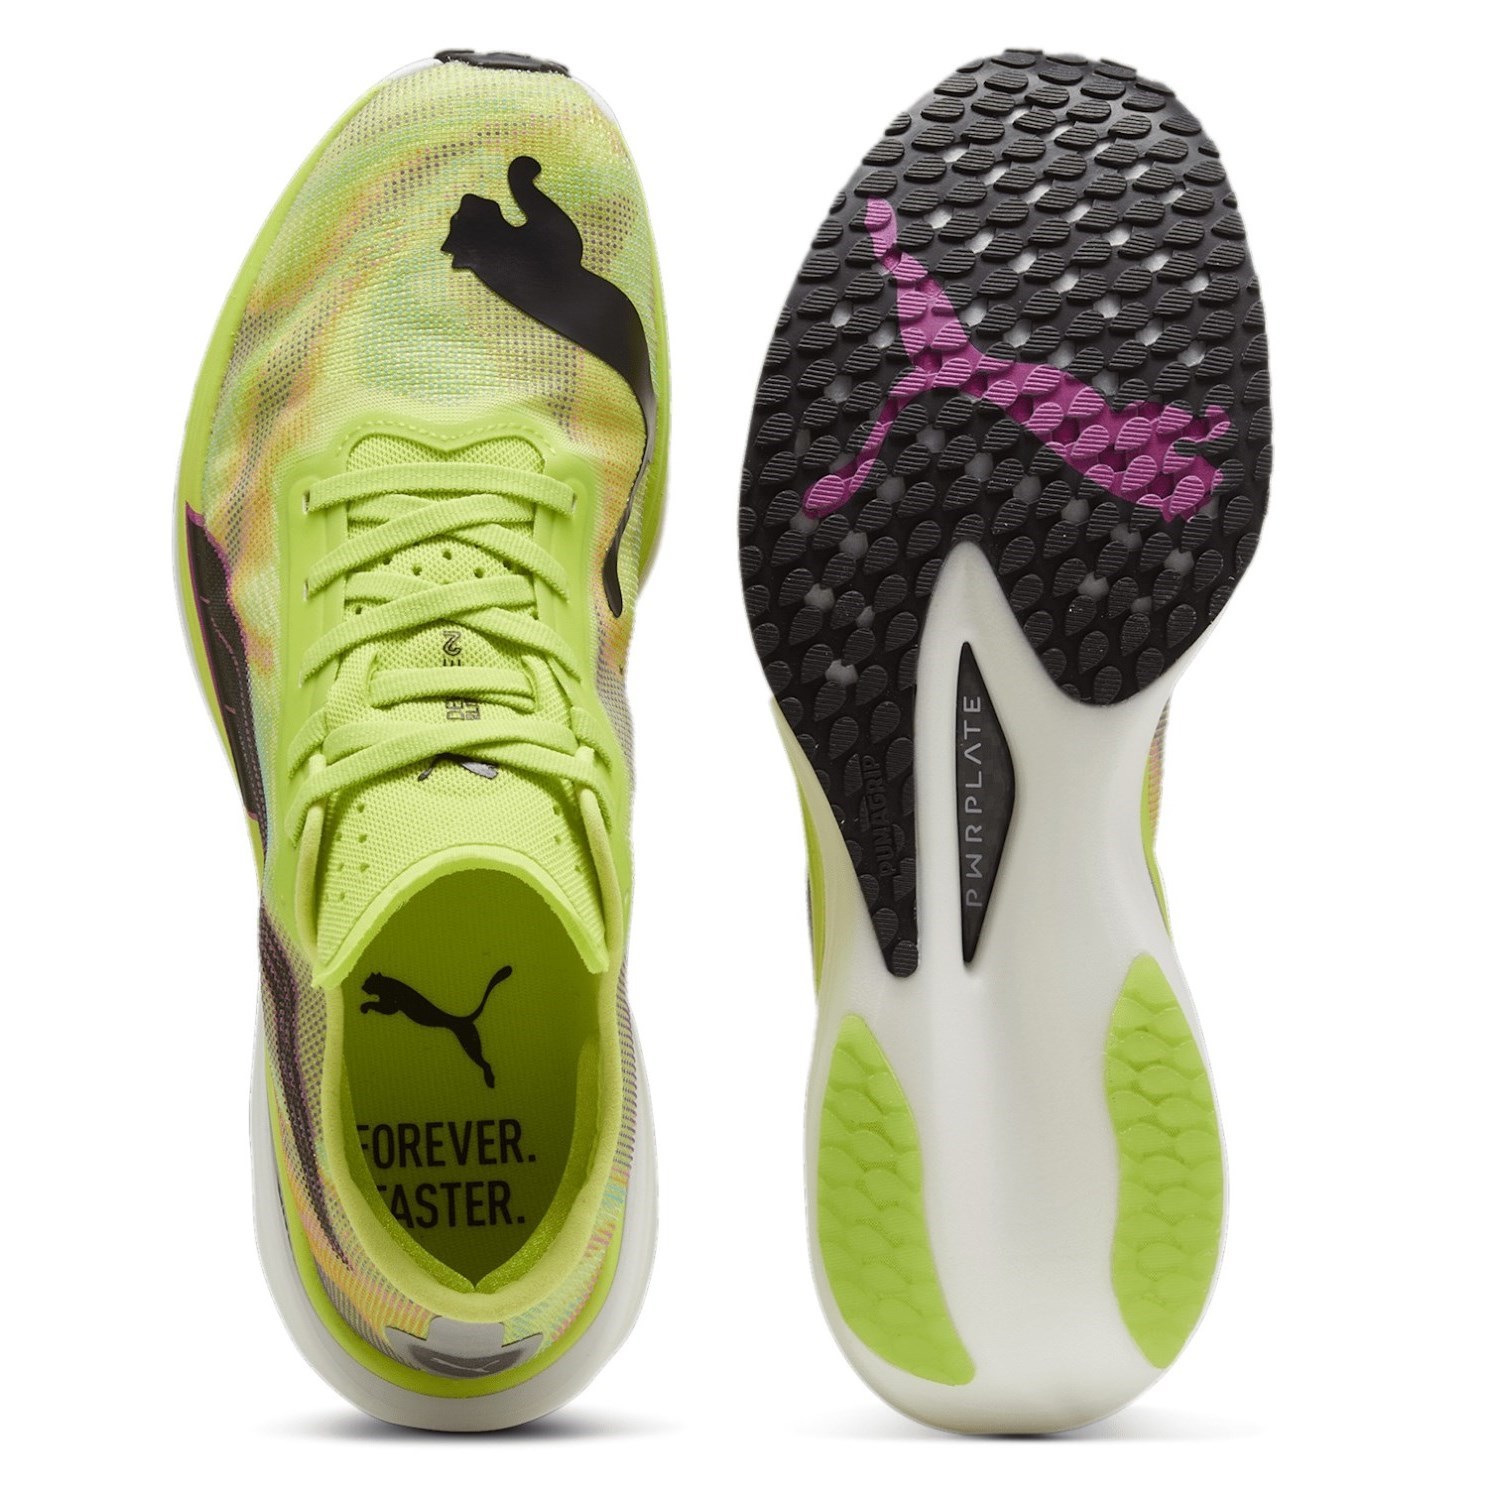 Puma Deviate Nitro Elite 2 Psychedelic Rush - Mens Running Shoes - Lime ...